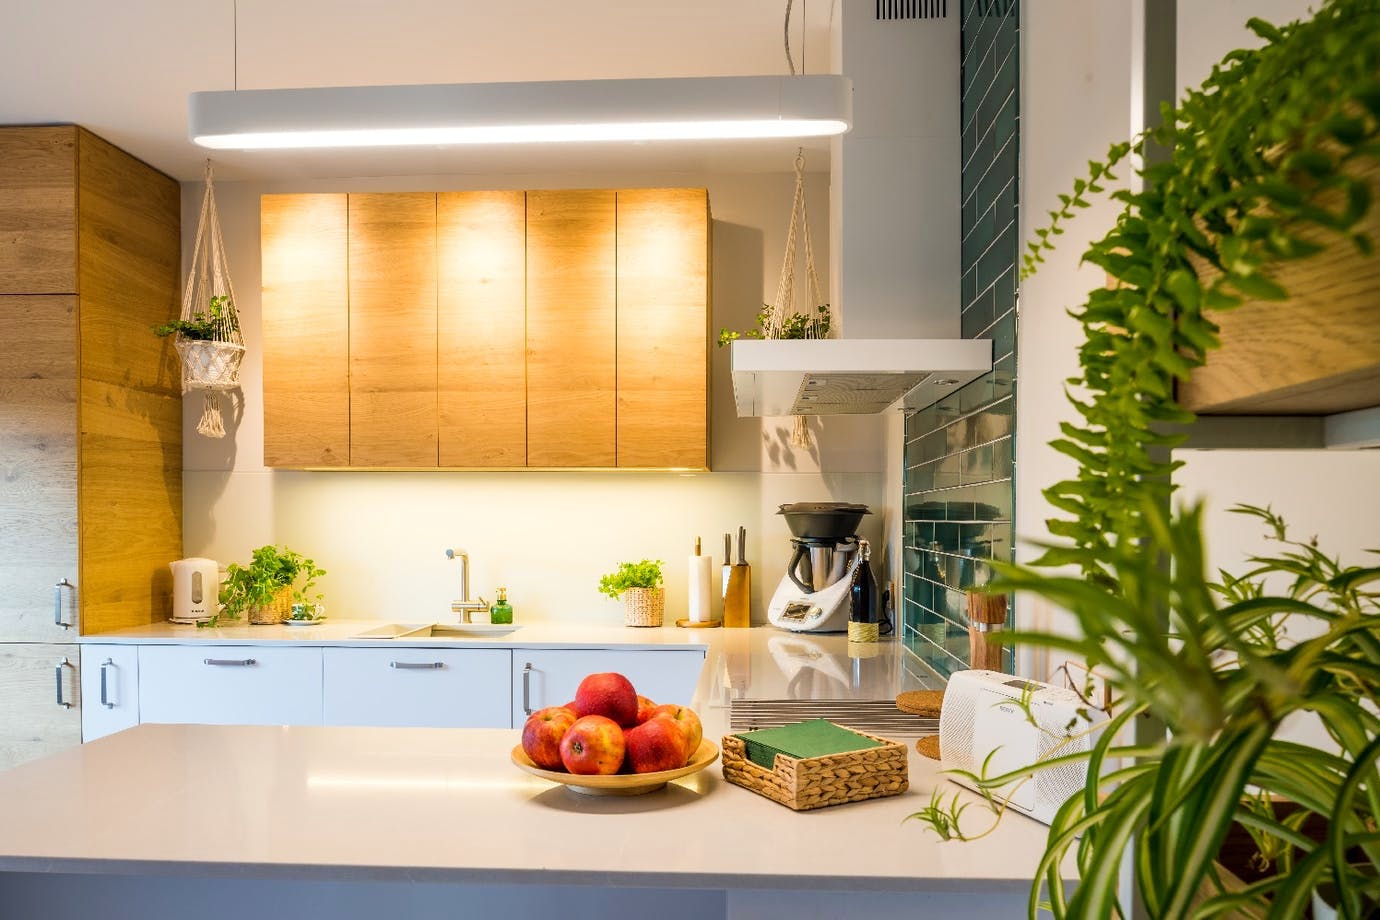 Image of kuchnia z akcentem zieleni 1 in 8 keys to designing and organizing your kitchen to avoid food infections - Cosentino